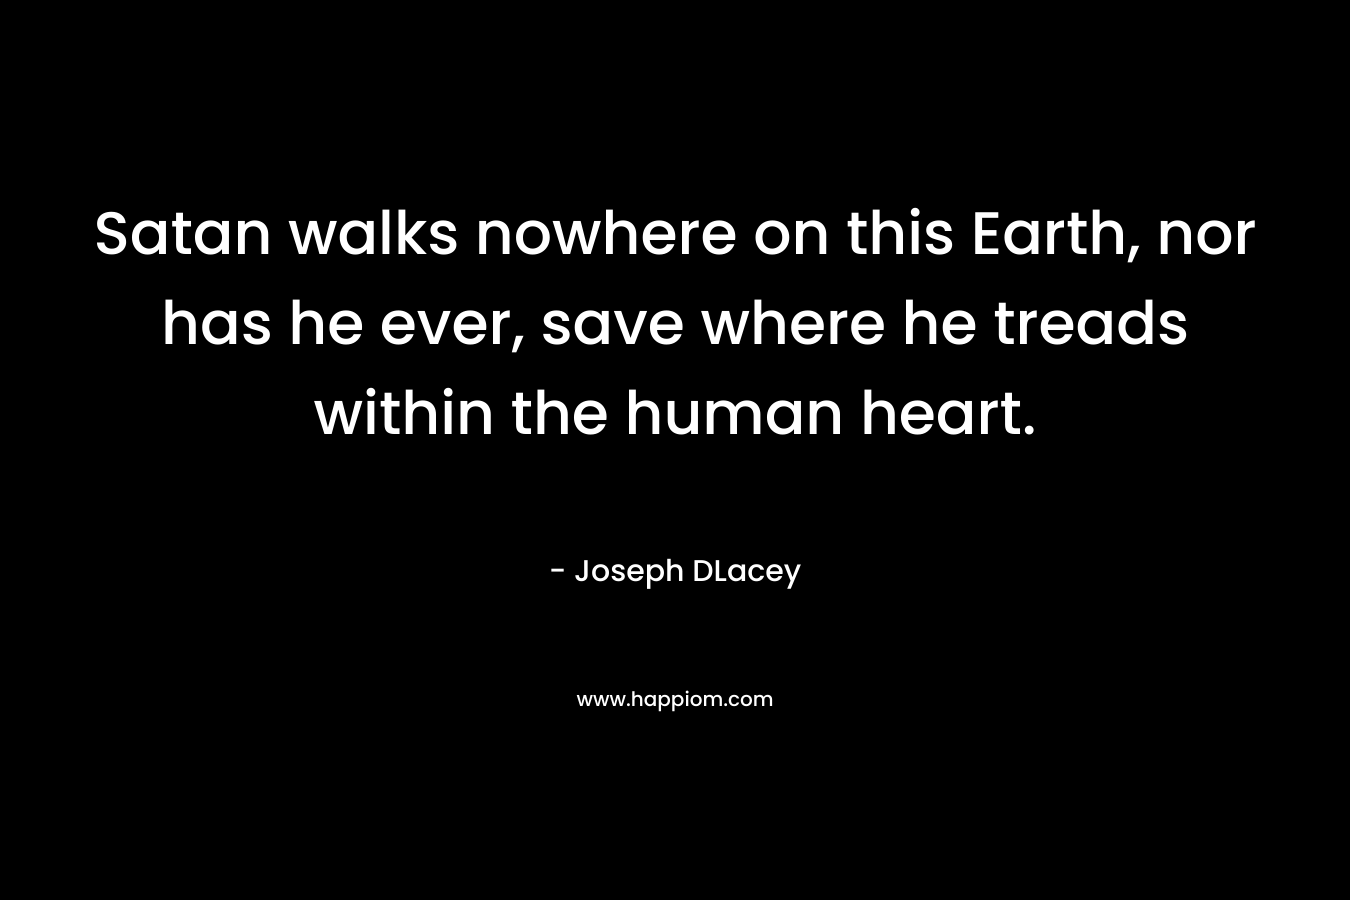 Satan walks nowhere on this Earth, nor has he ever, save where he treads within the human heart.